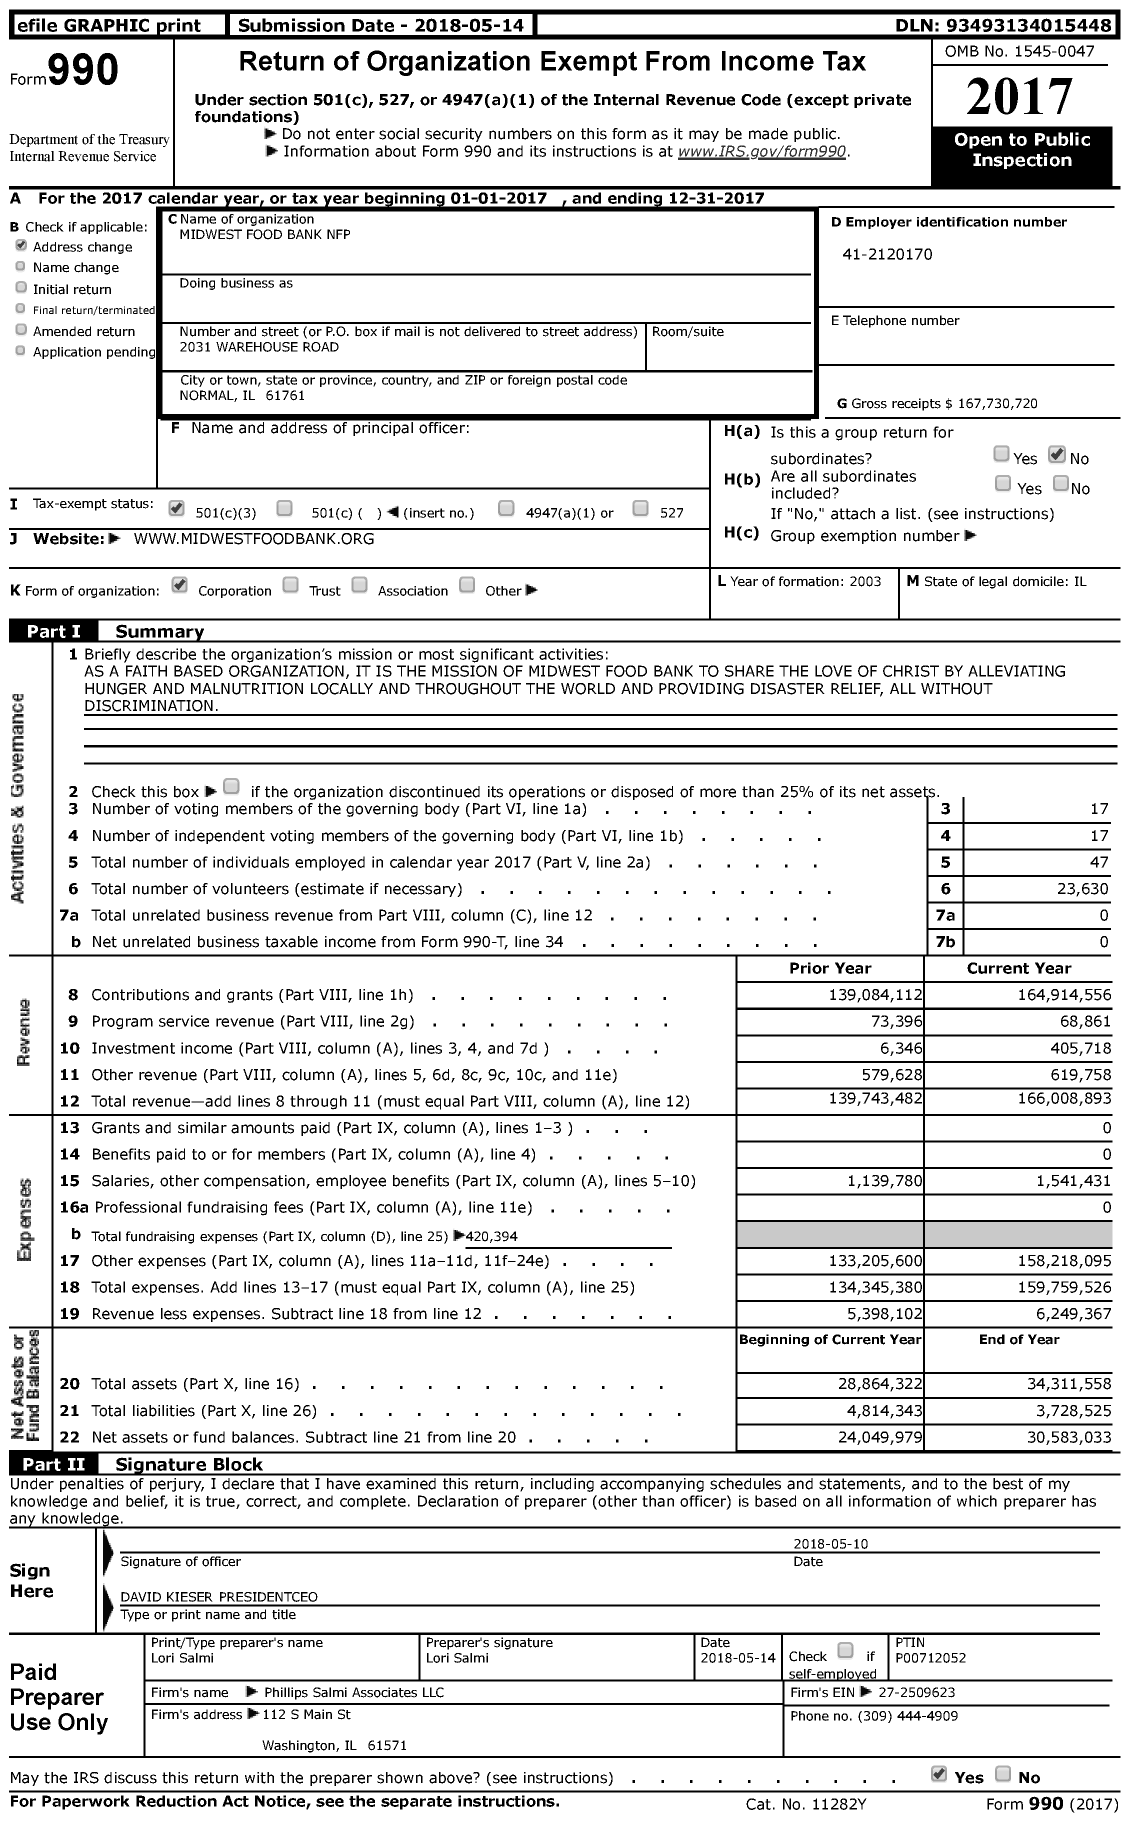 Image of first page of 2017 Form 990 for Midwest Food Bank NFP